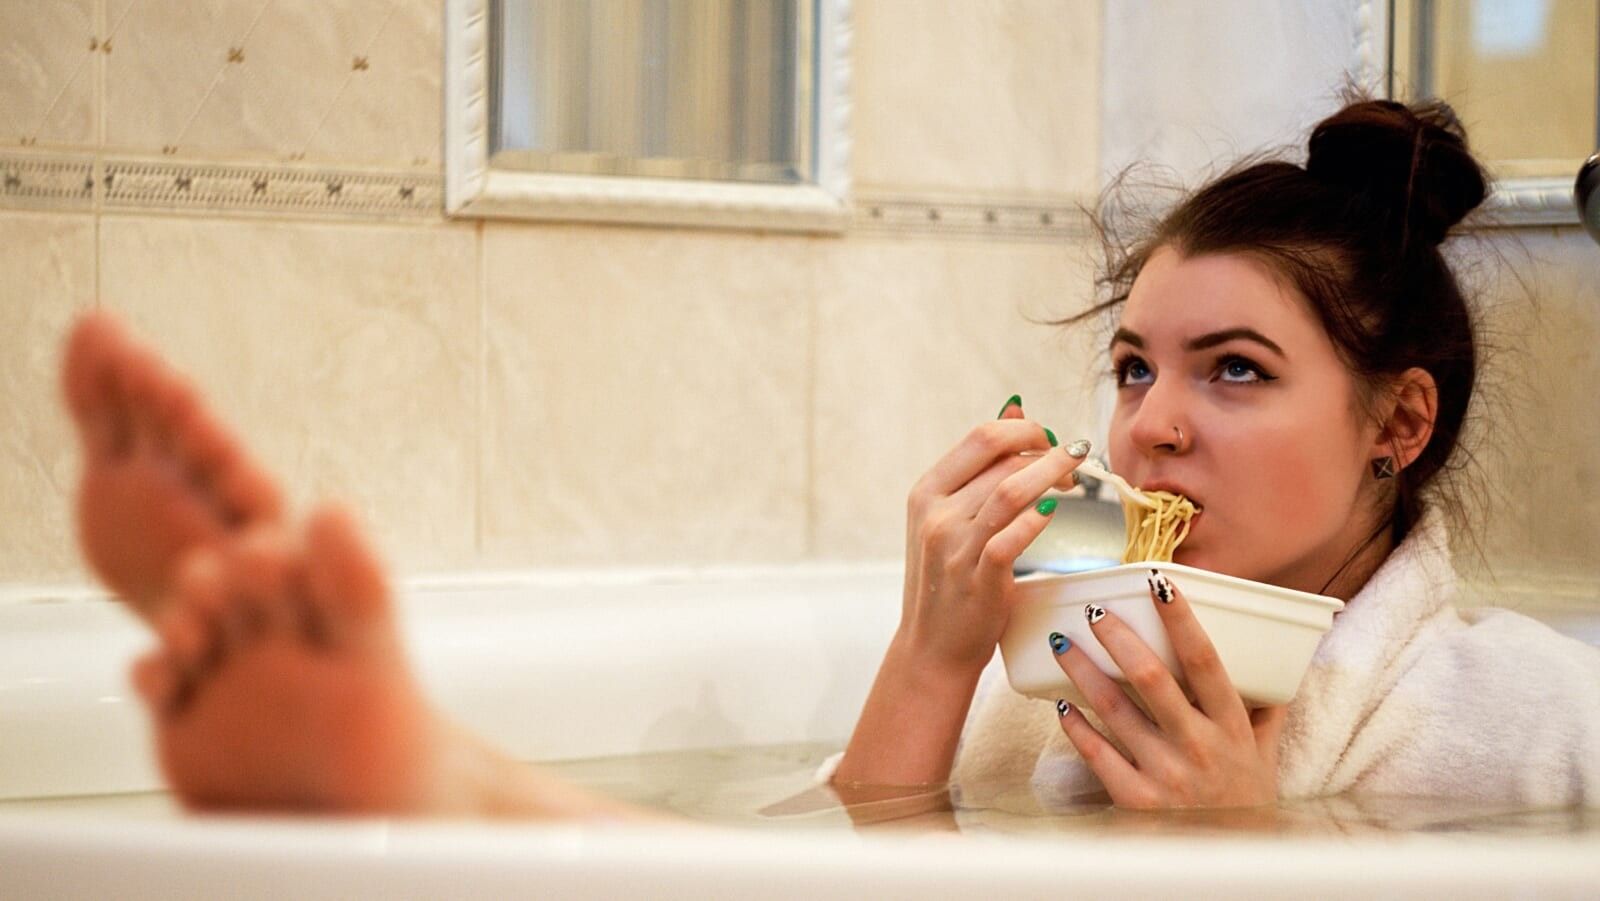 young woman eating noodles in the bath tub